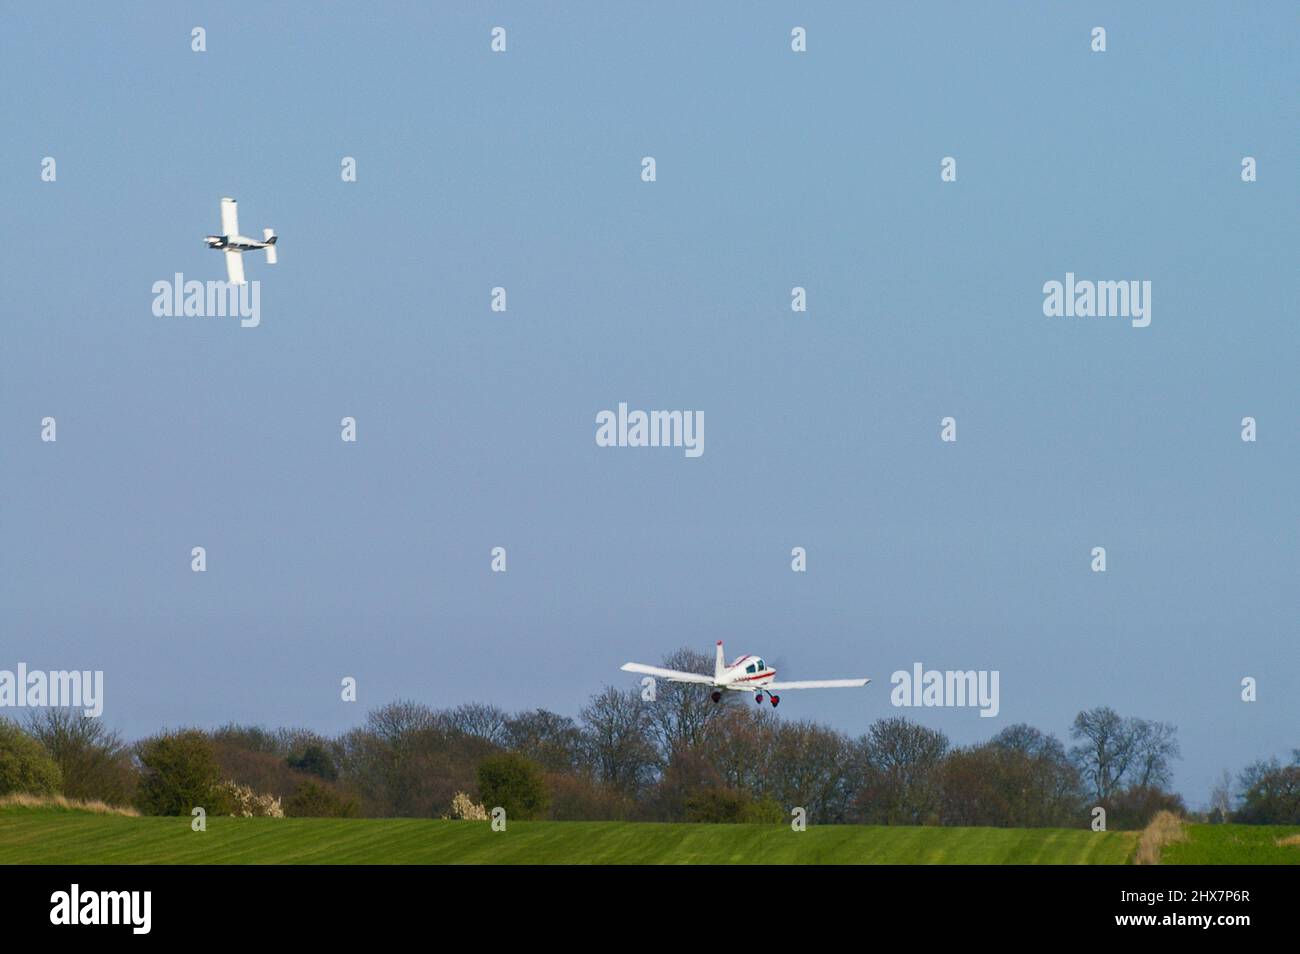 Planes taking off from Great Oakley grass airstrip in Essex to compete in the Royal Aero Club Air Race. Small private planes flying in air racing Stock Photo